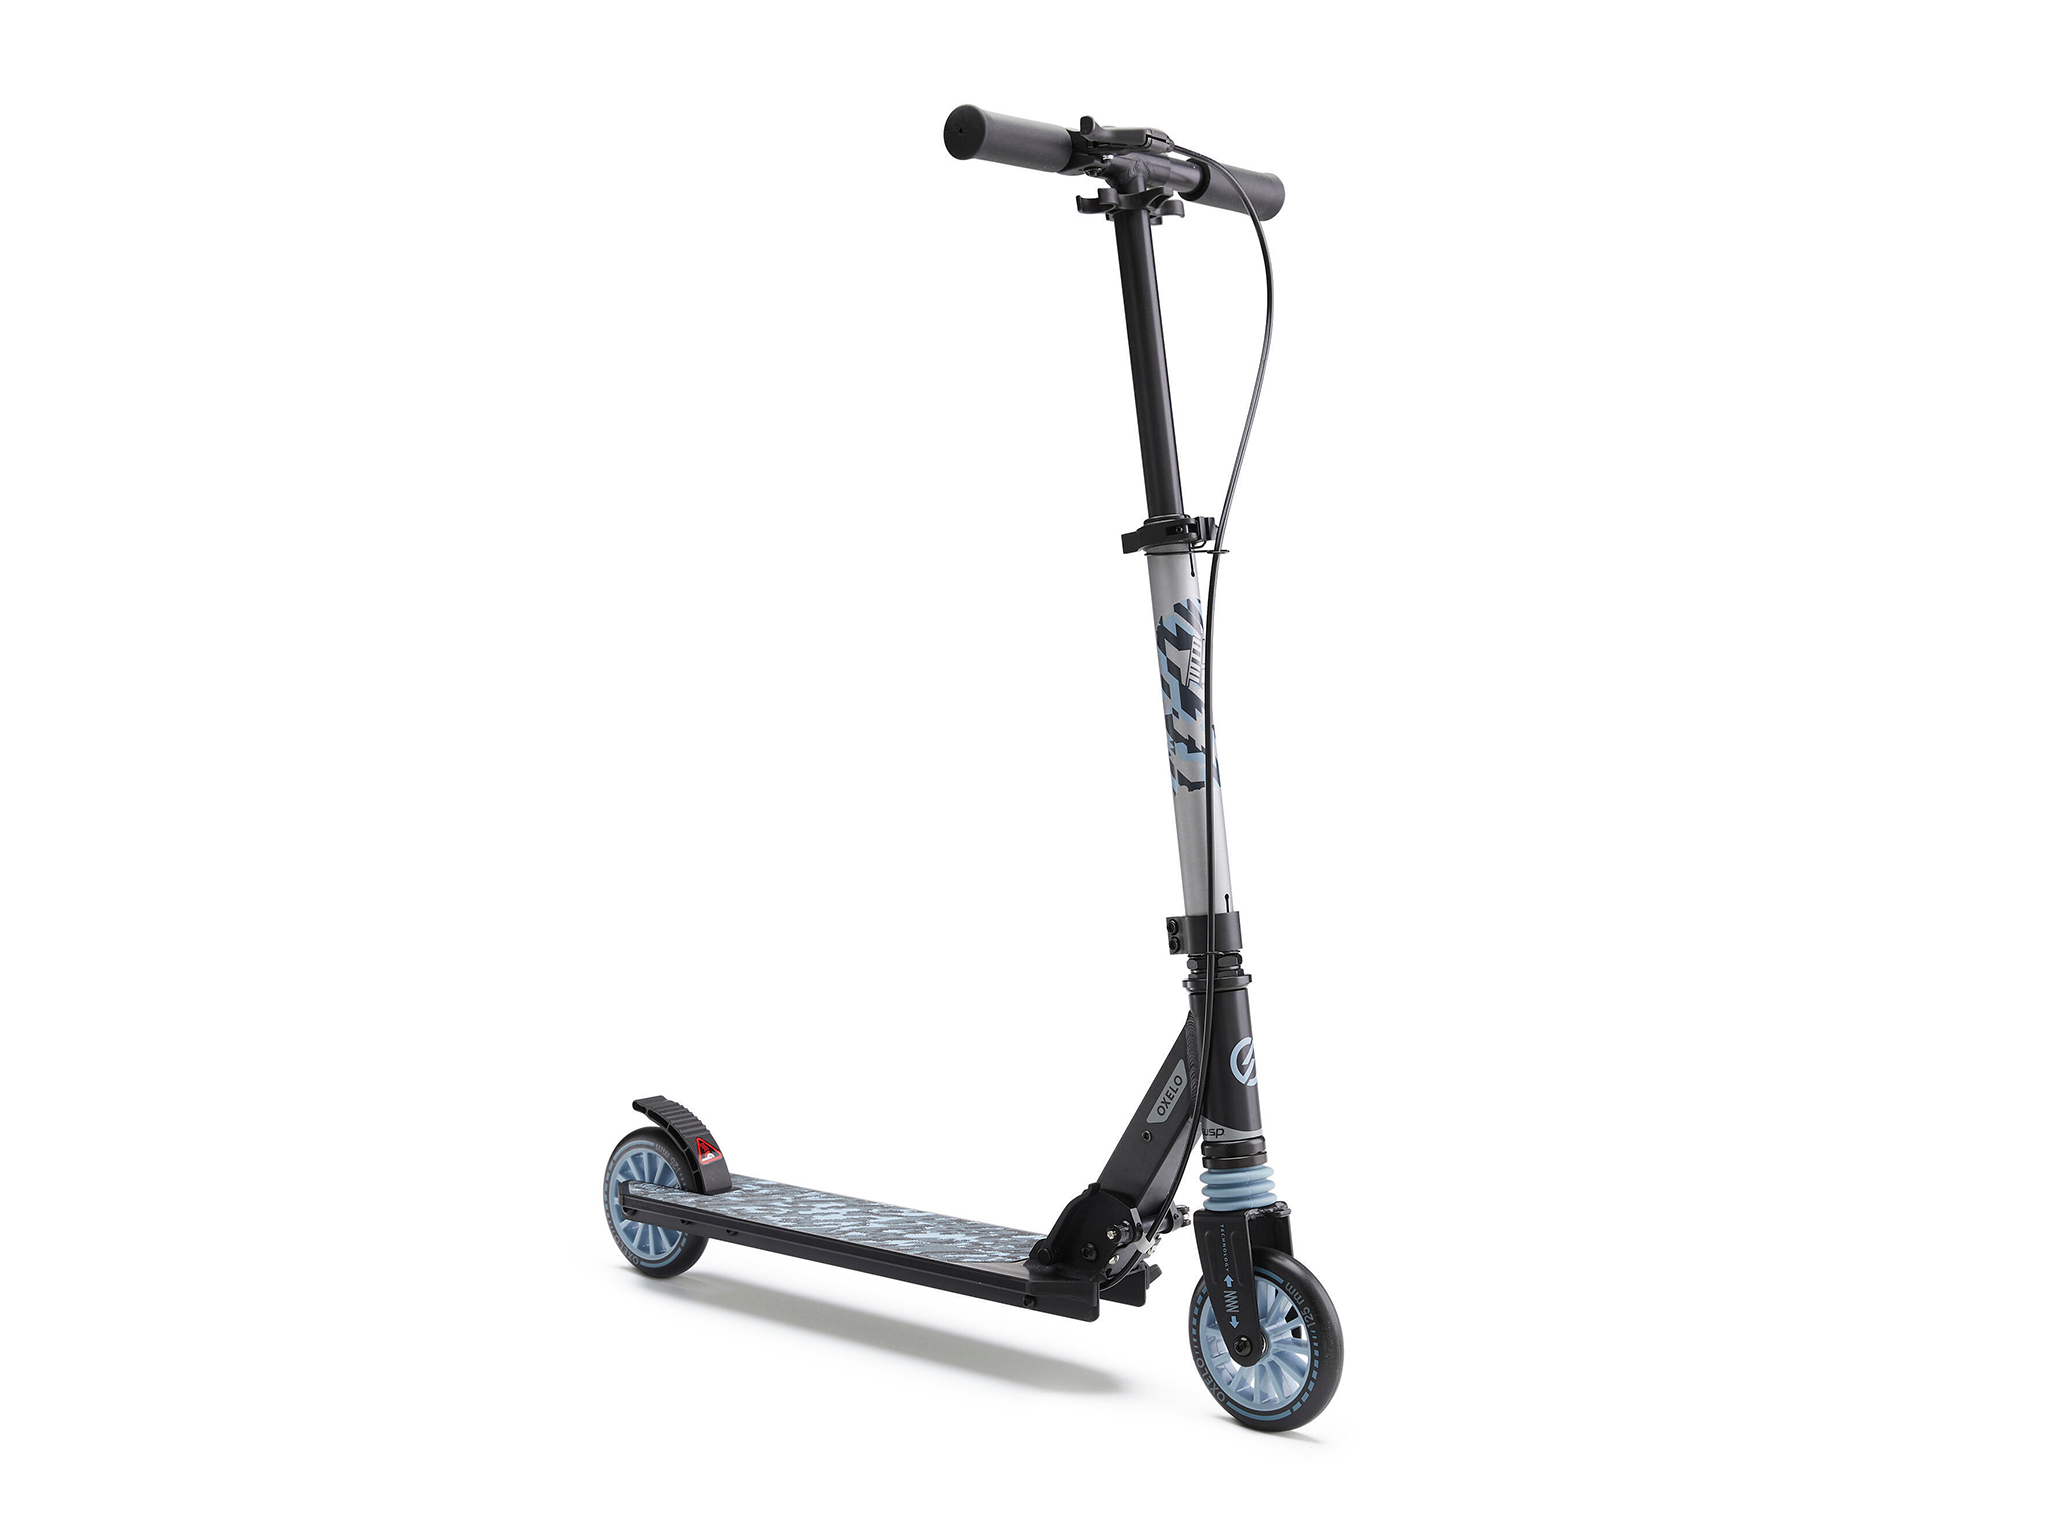 Oxelo kids’ mid 5 scooter with handlebar break and suspension